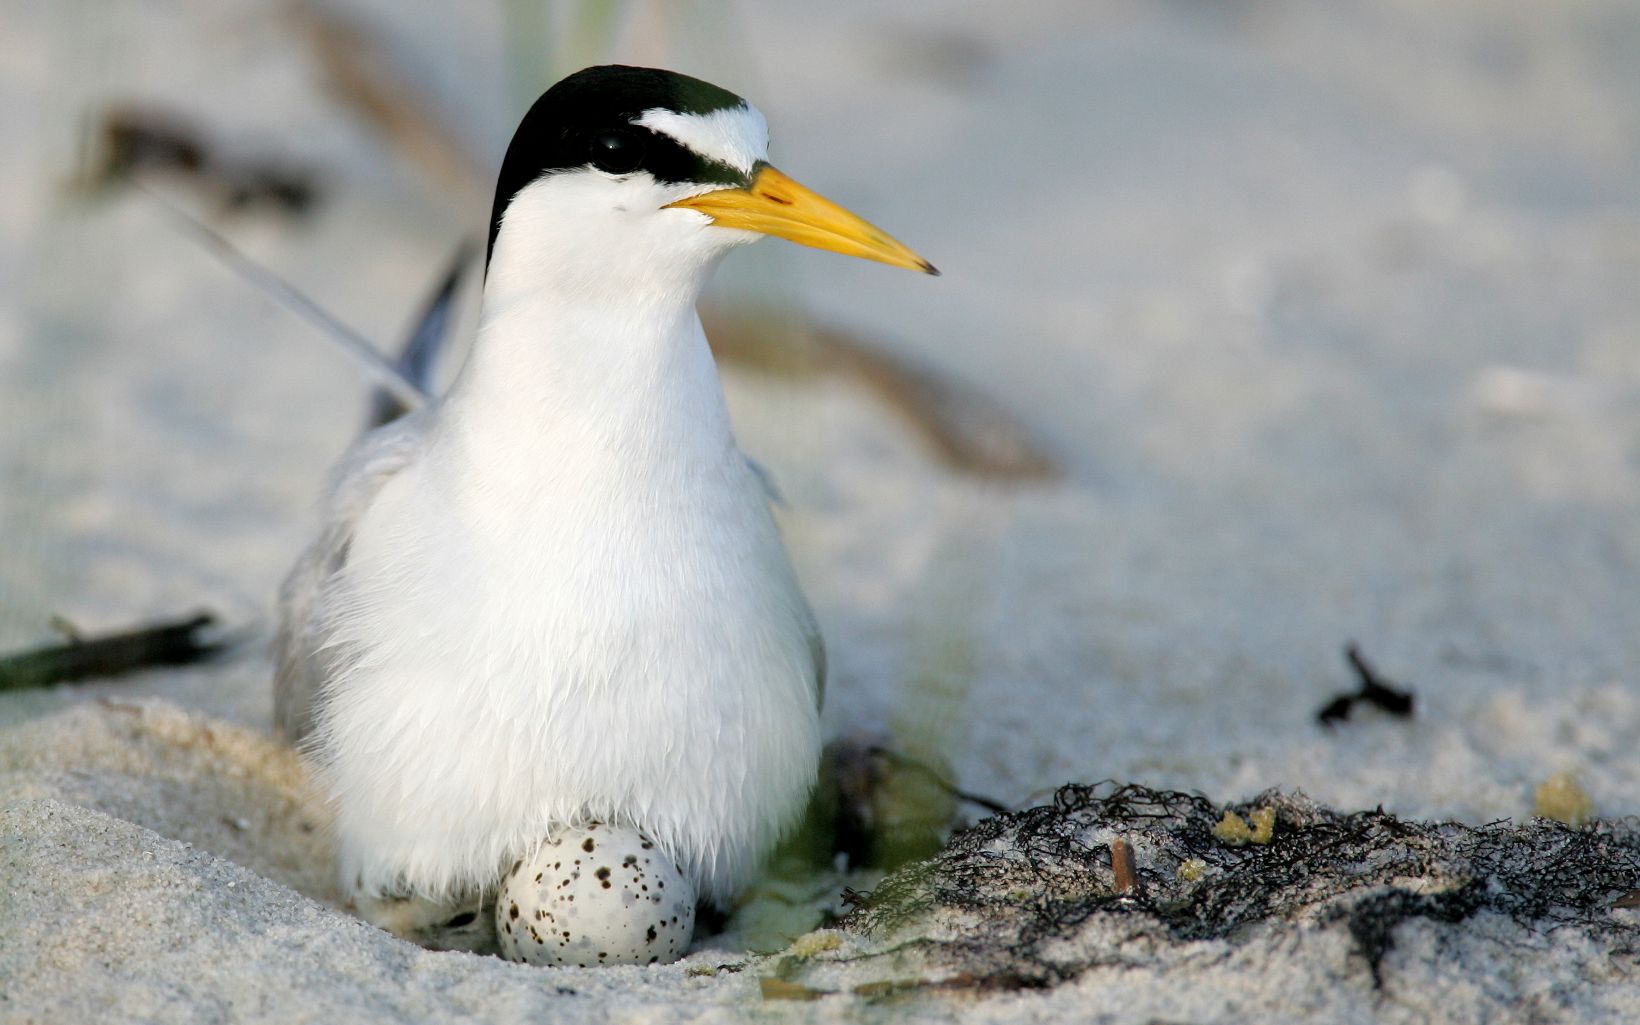 The smallest of American terns, the Least Tern is found nesting on sandy beaches along the southern coasts of the United States.